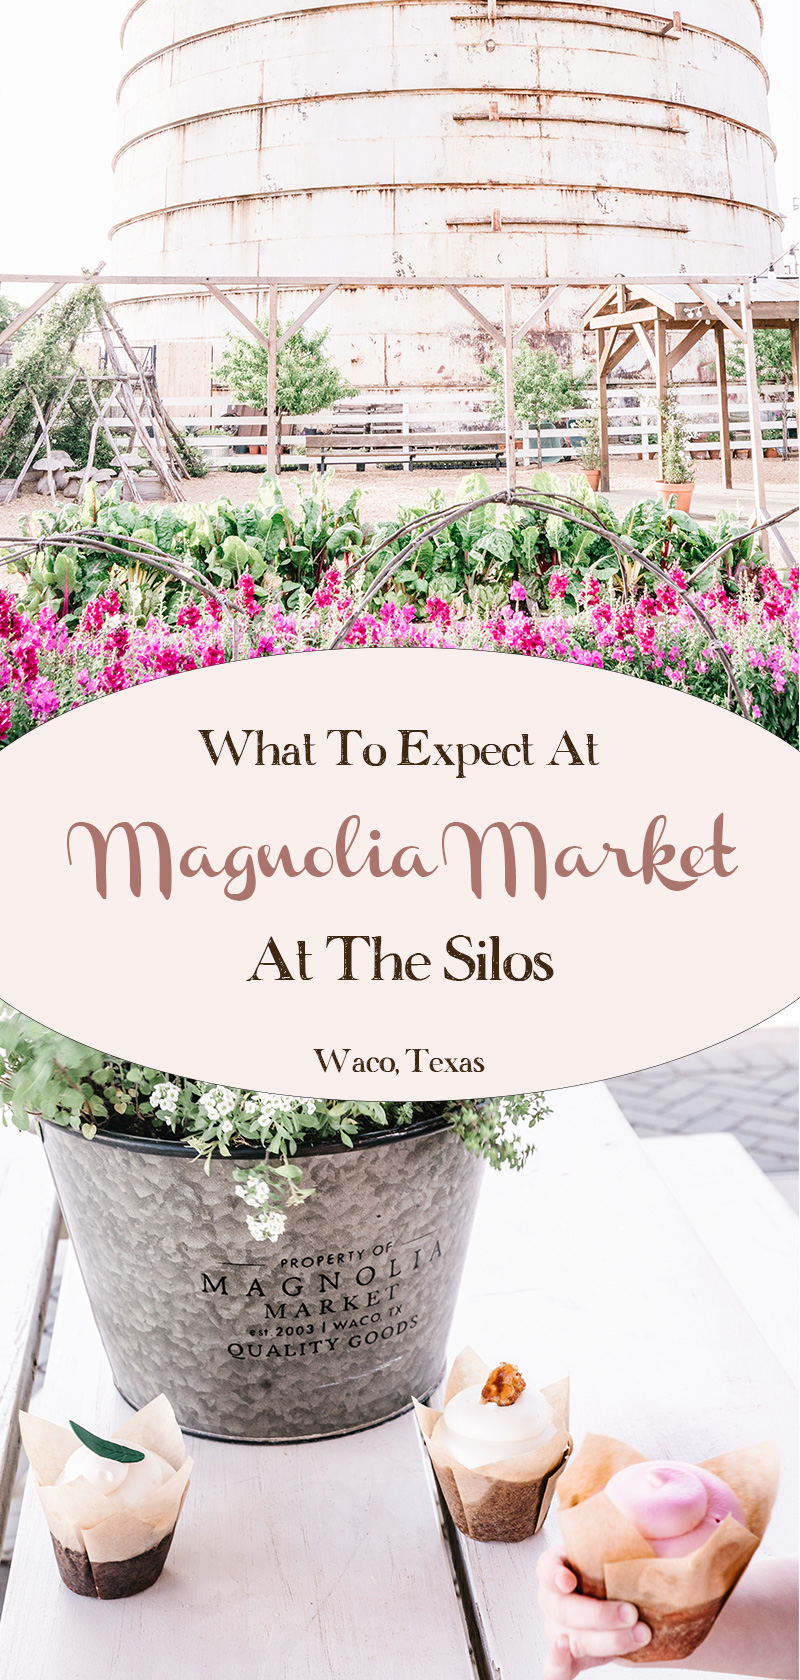 What-To-Expect-At-Magnolia-Market-at-the-Silos-in-Waco-Texas